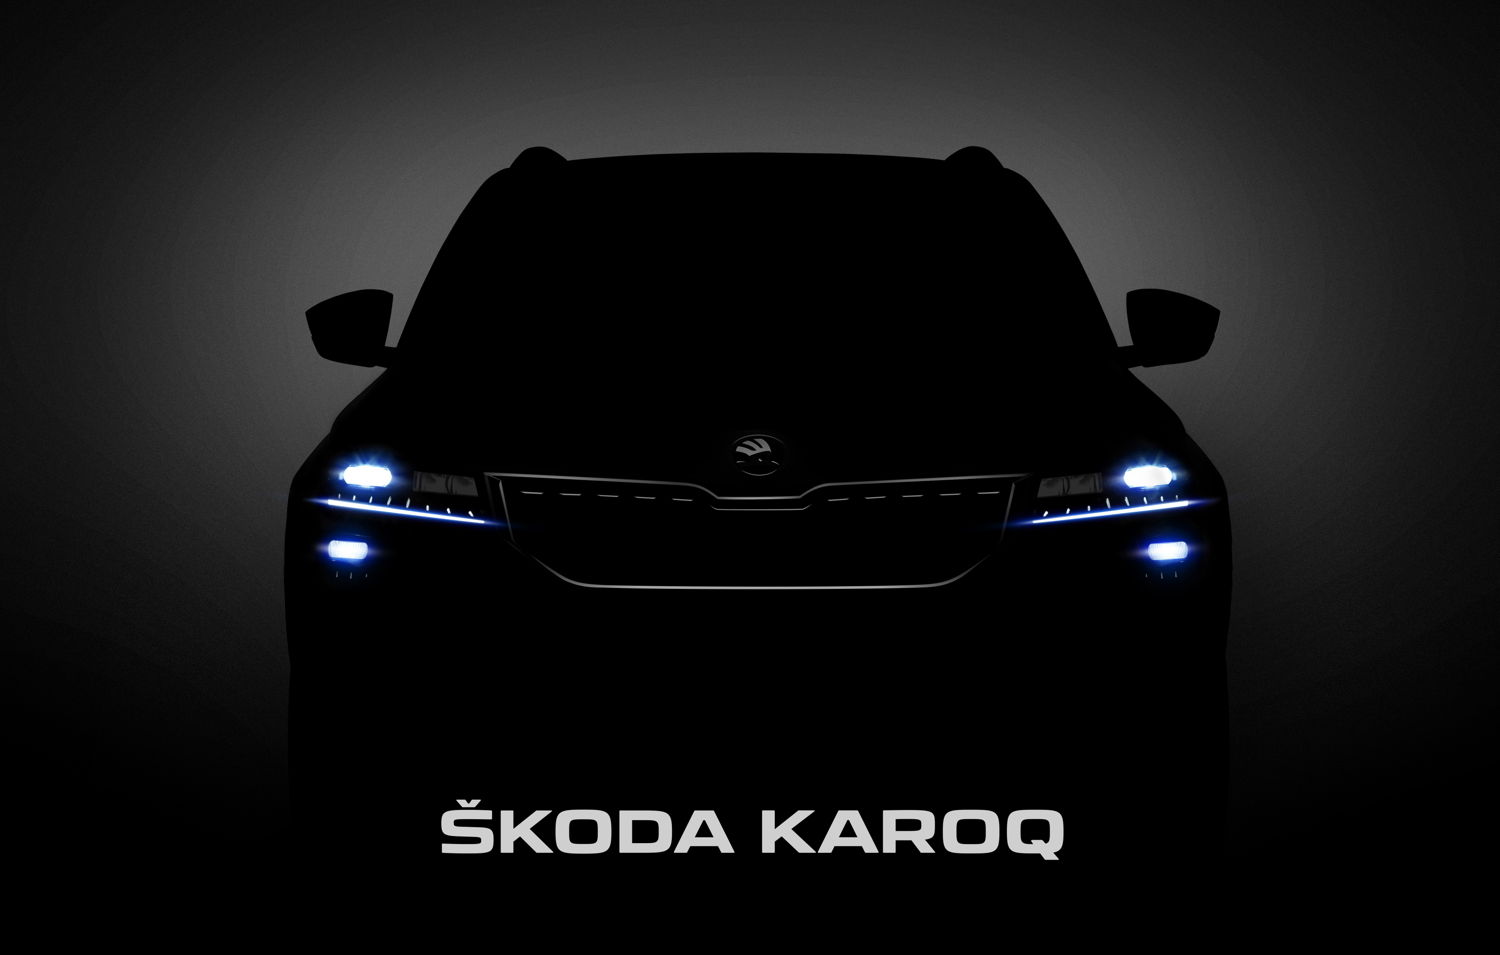 Shortly before its world premiere, the Czech car manufacturer provides a first look at the new compact SUV ŠKODA KAROQ.